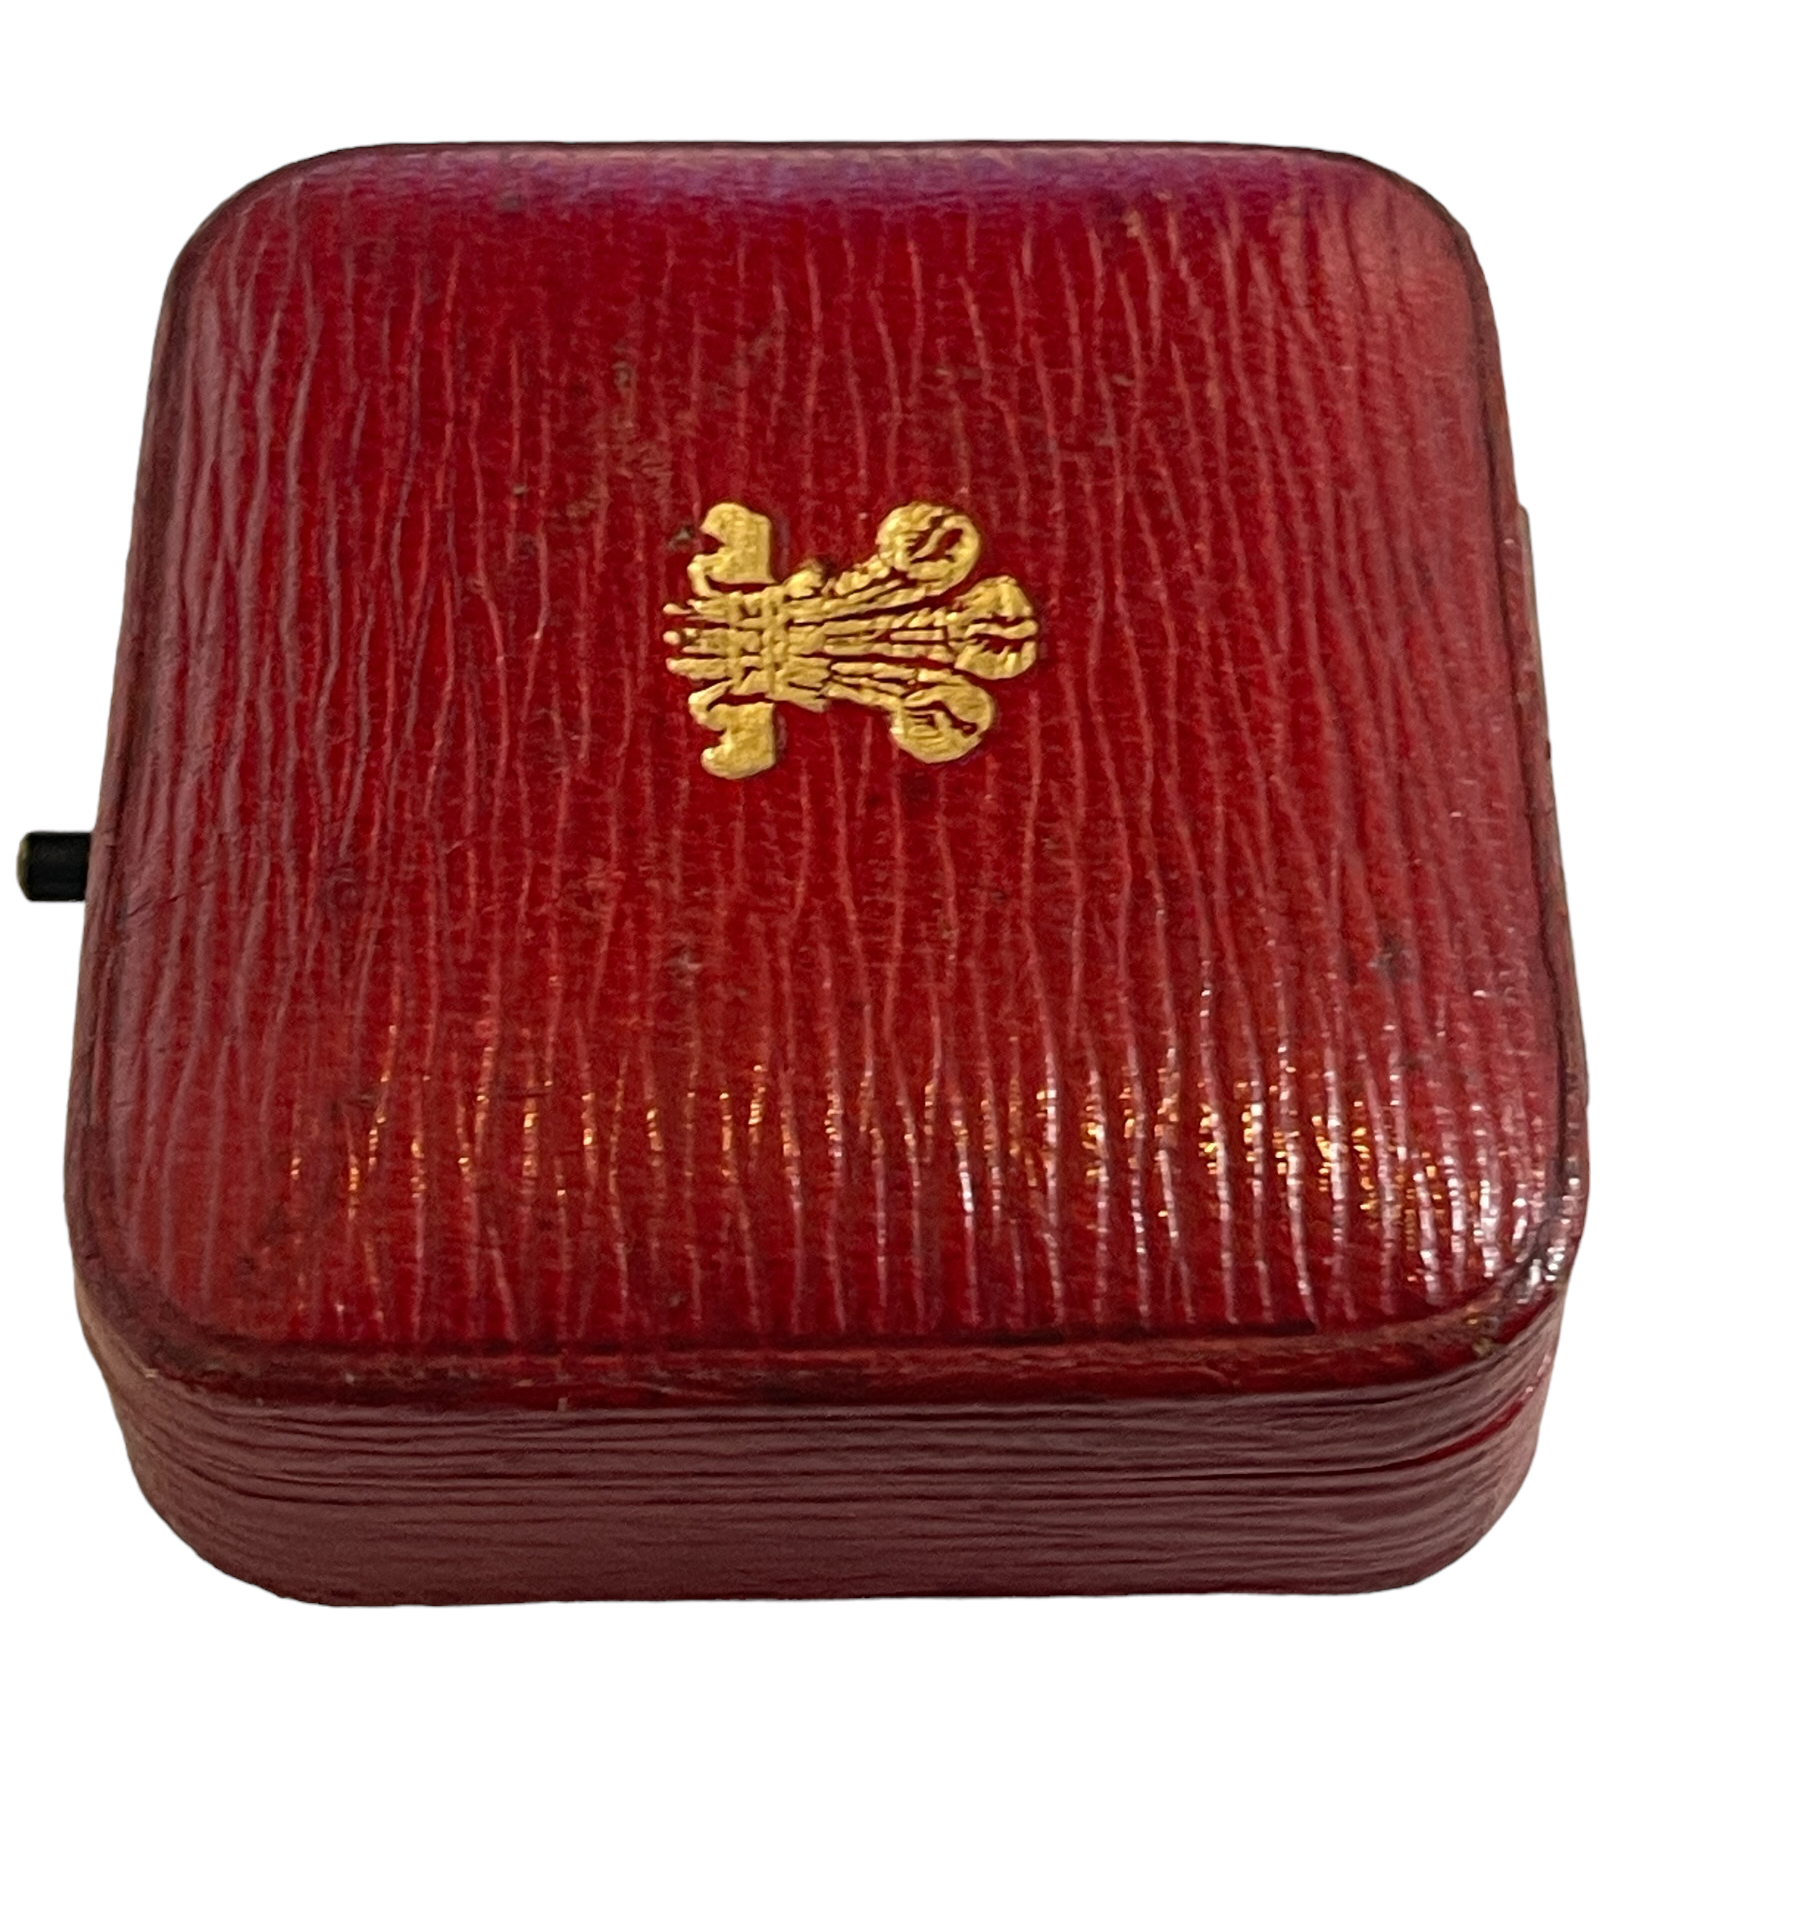 Alfred Clark New Bond St London Prince of Wales Feathers Cypher Boxed Vesta Case. - Image 11 of 13